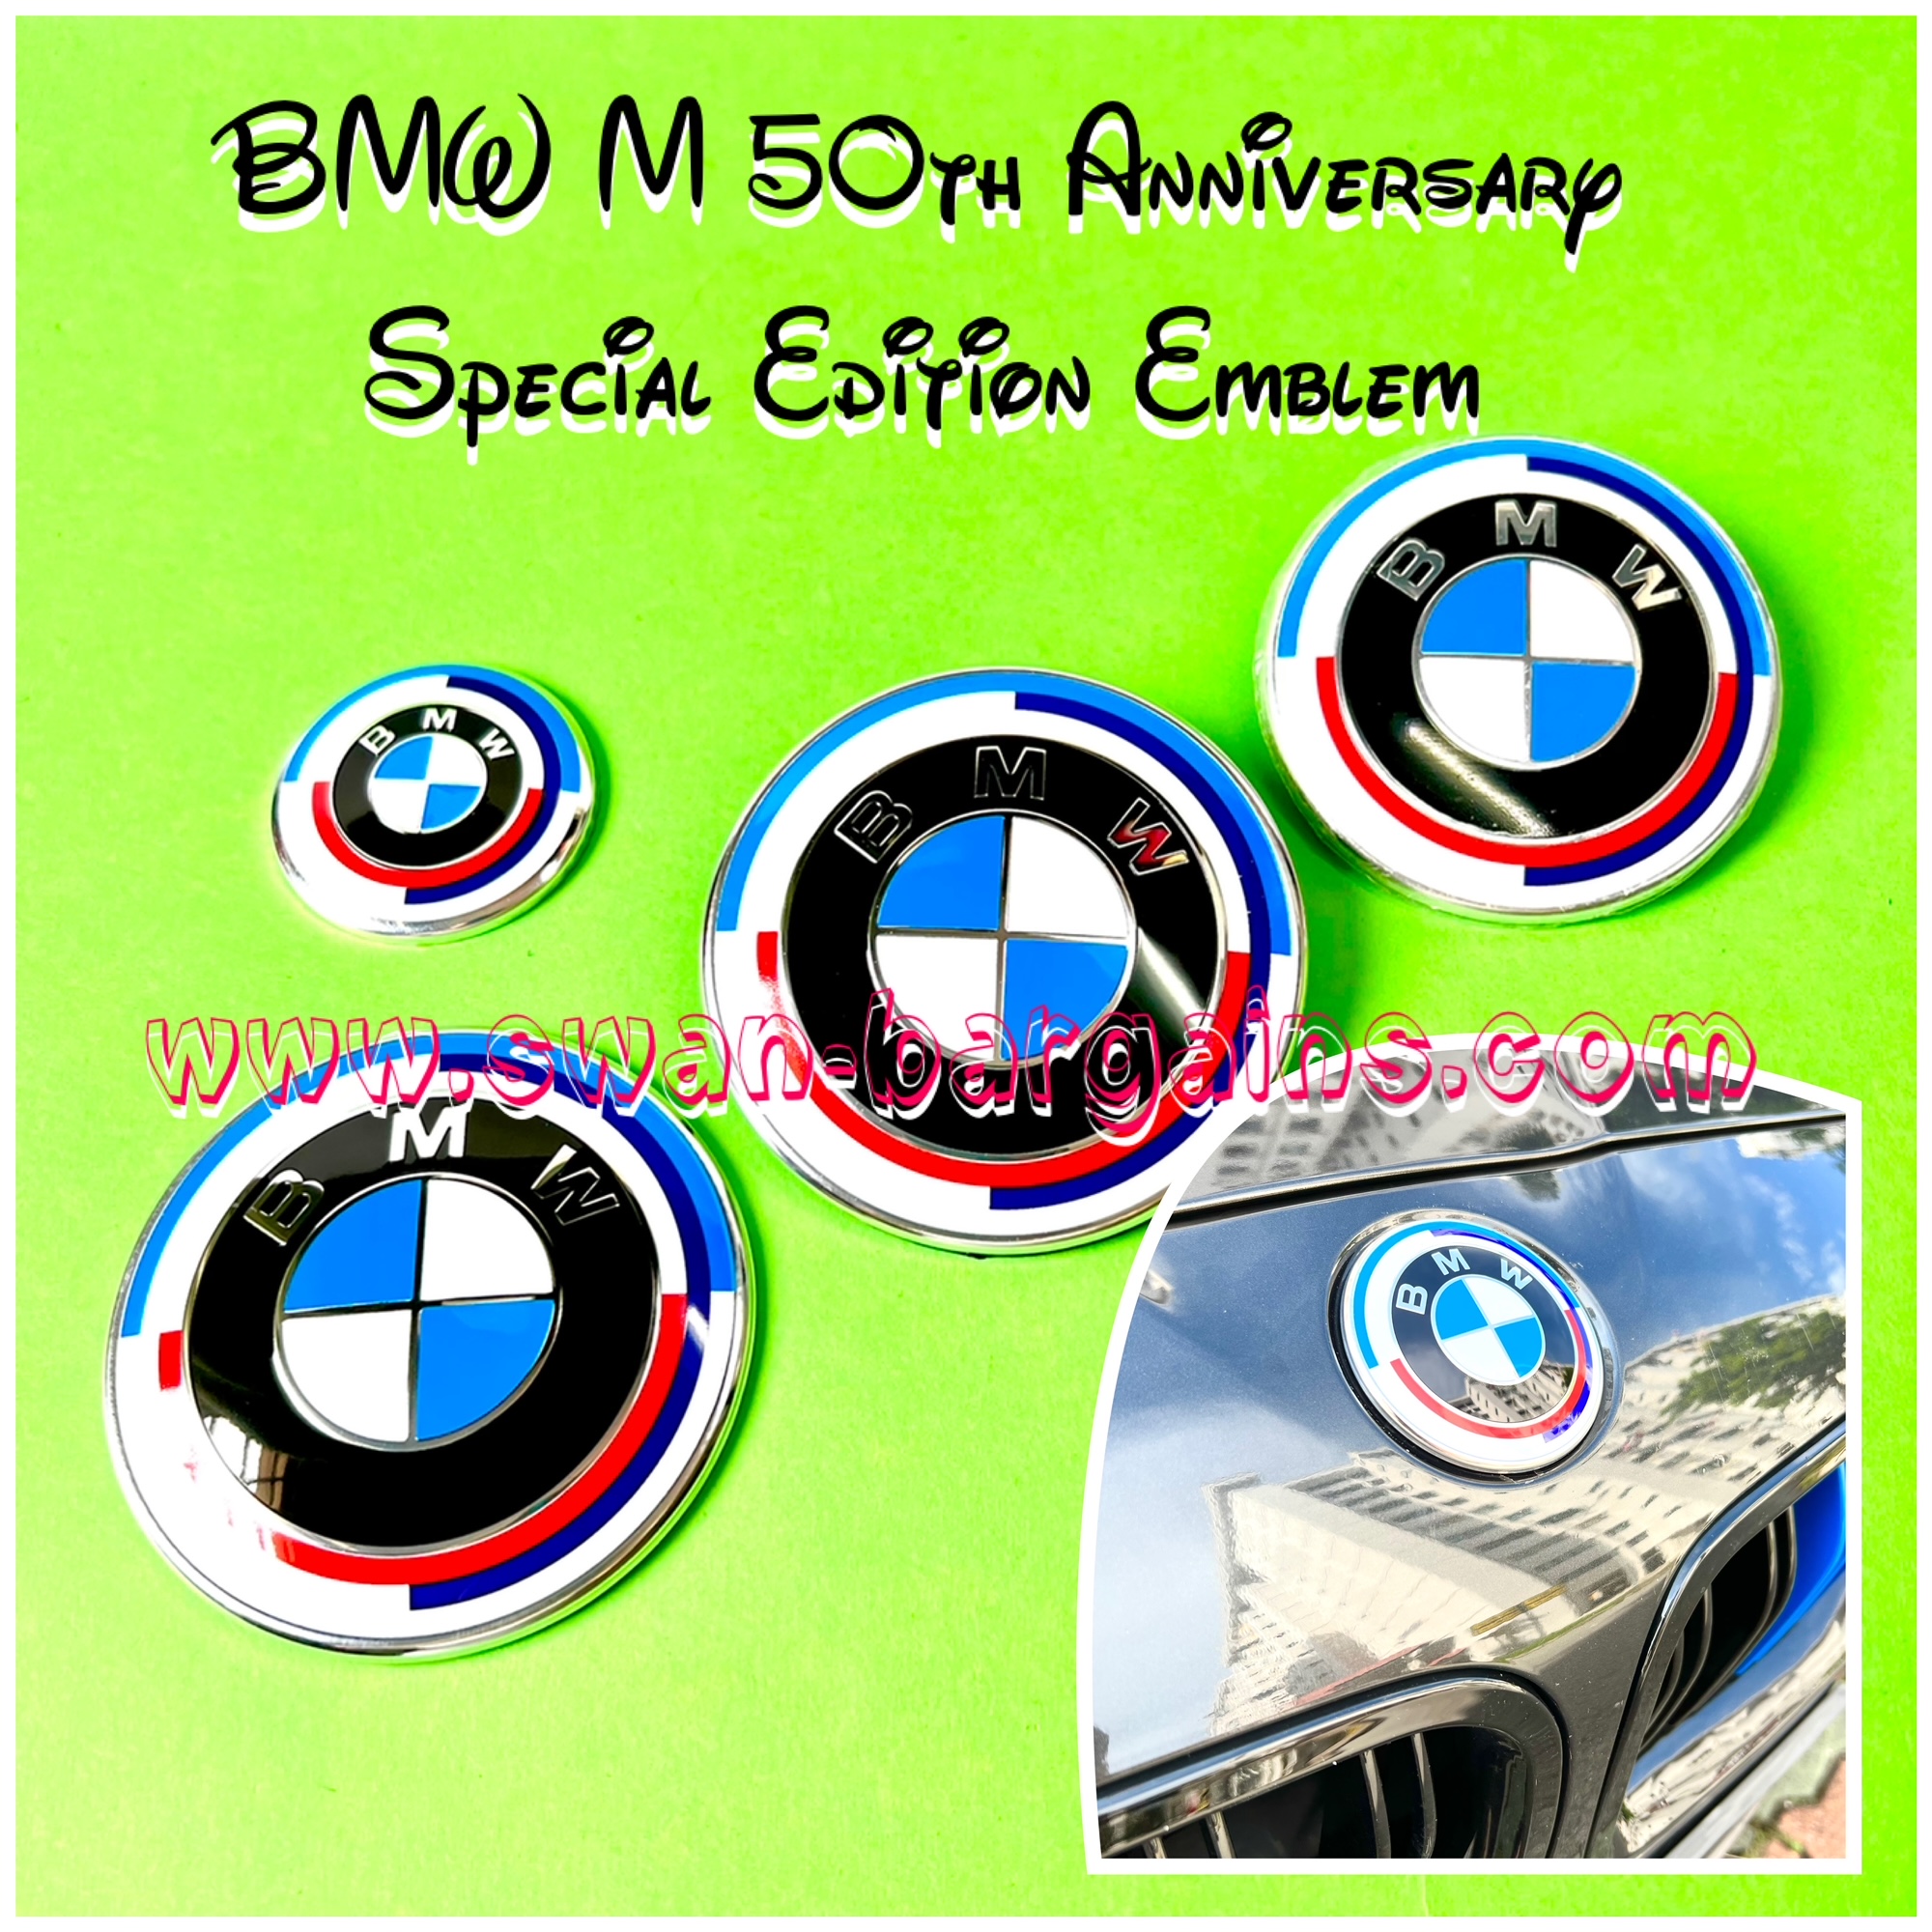 BMW M 50th Anniversary Special Edition Emblem – Welcome to Swan Bargains  Online Store!